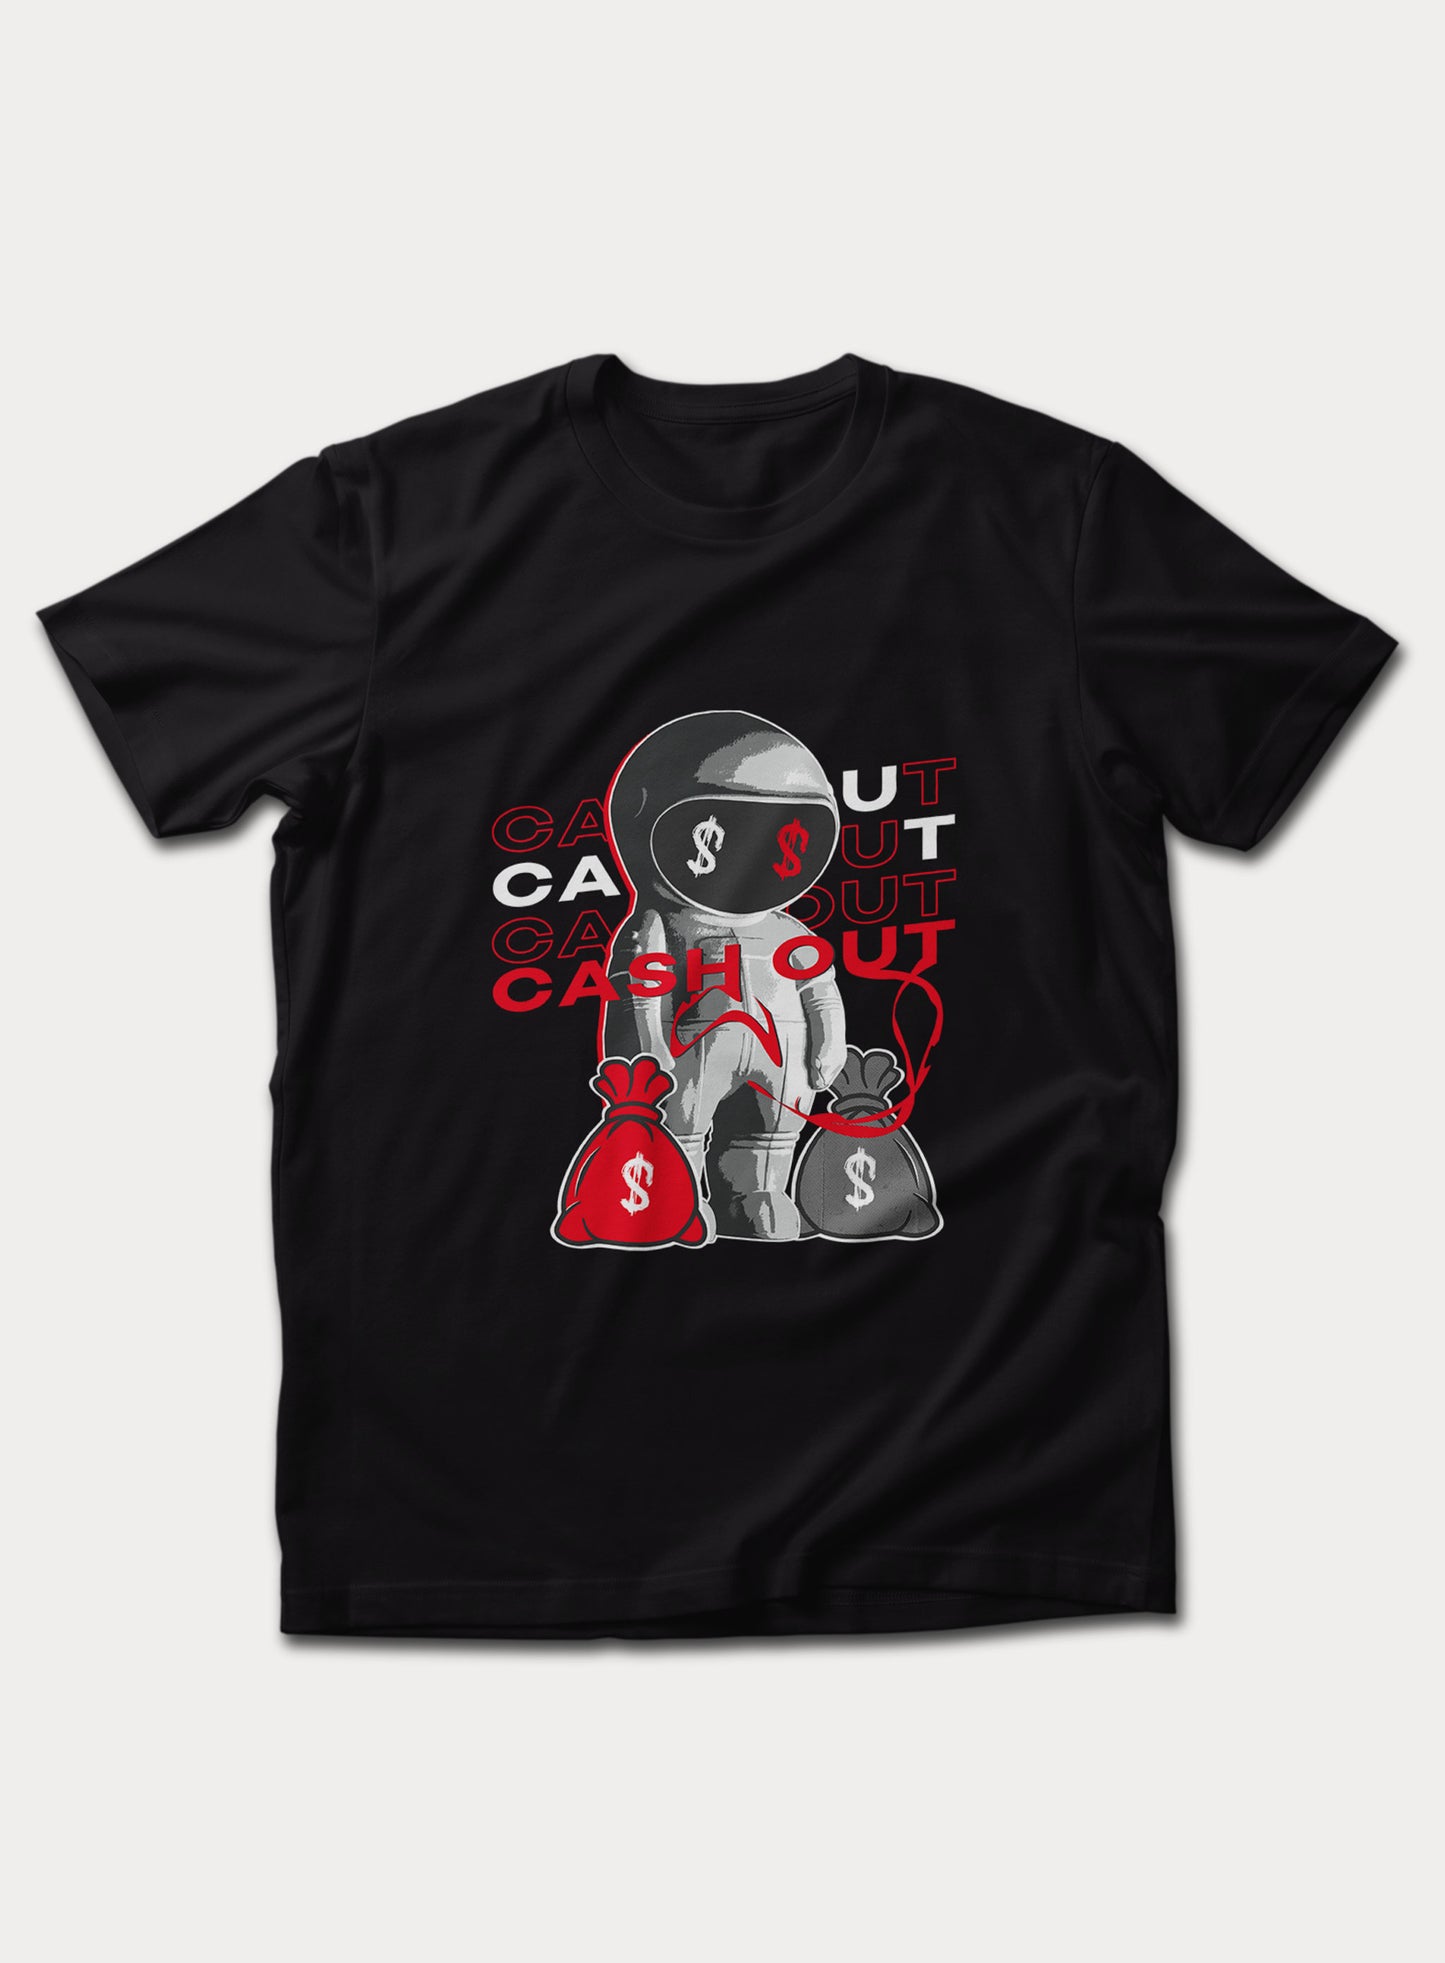 Cash Out Tee